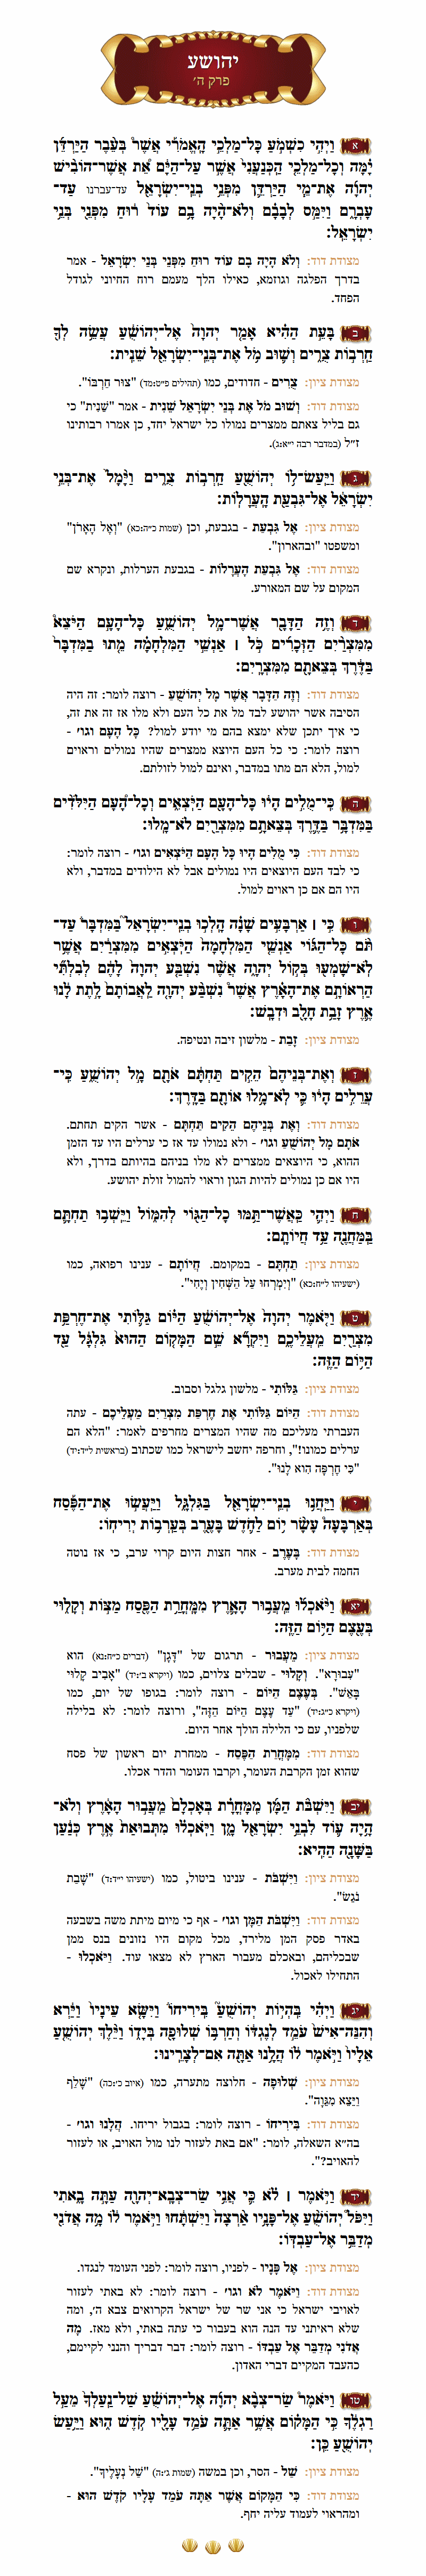 Sefer Yehoshua Chapter 5 with commentary